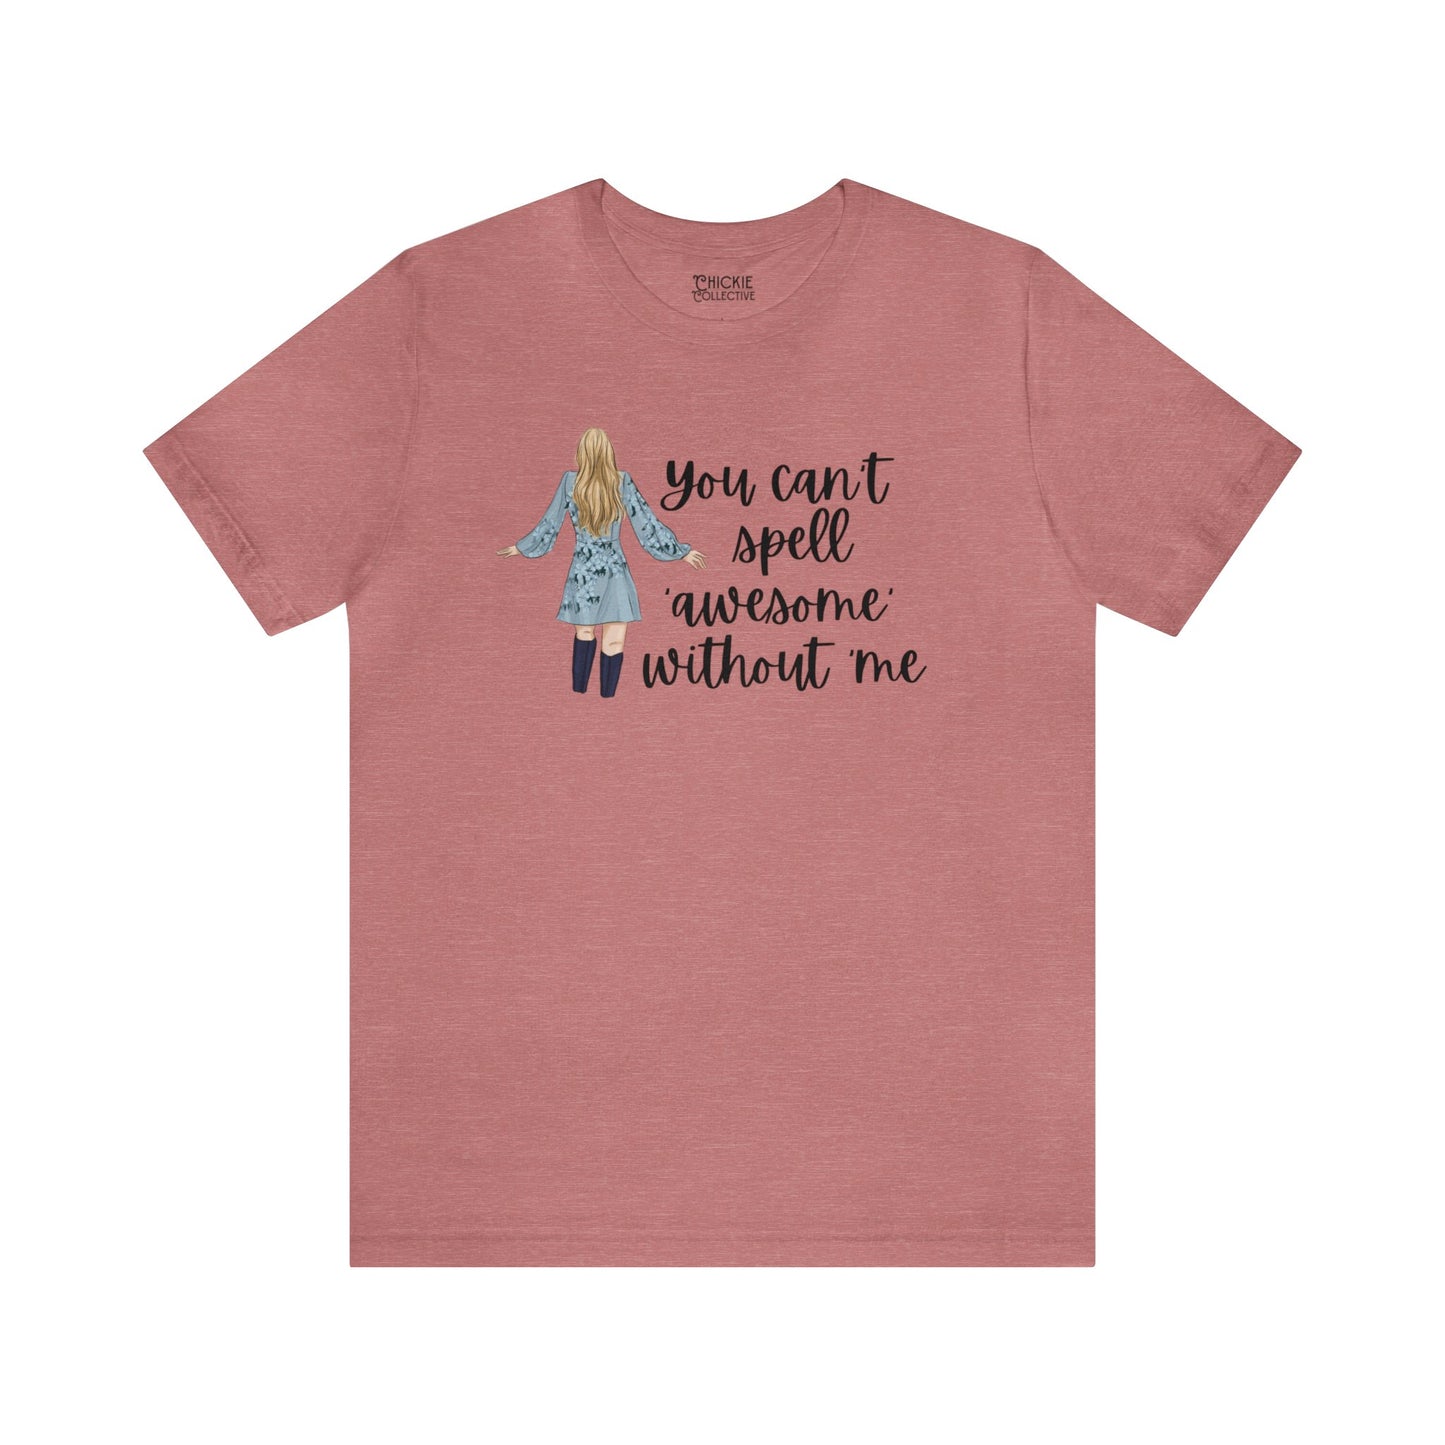 Taylor Swift Preppy Picture T-Shirt - You Can't Spell Awesome Without Me